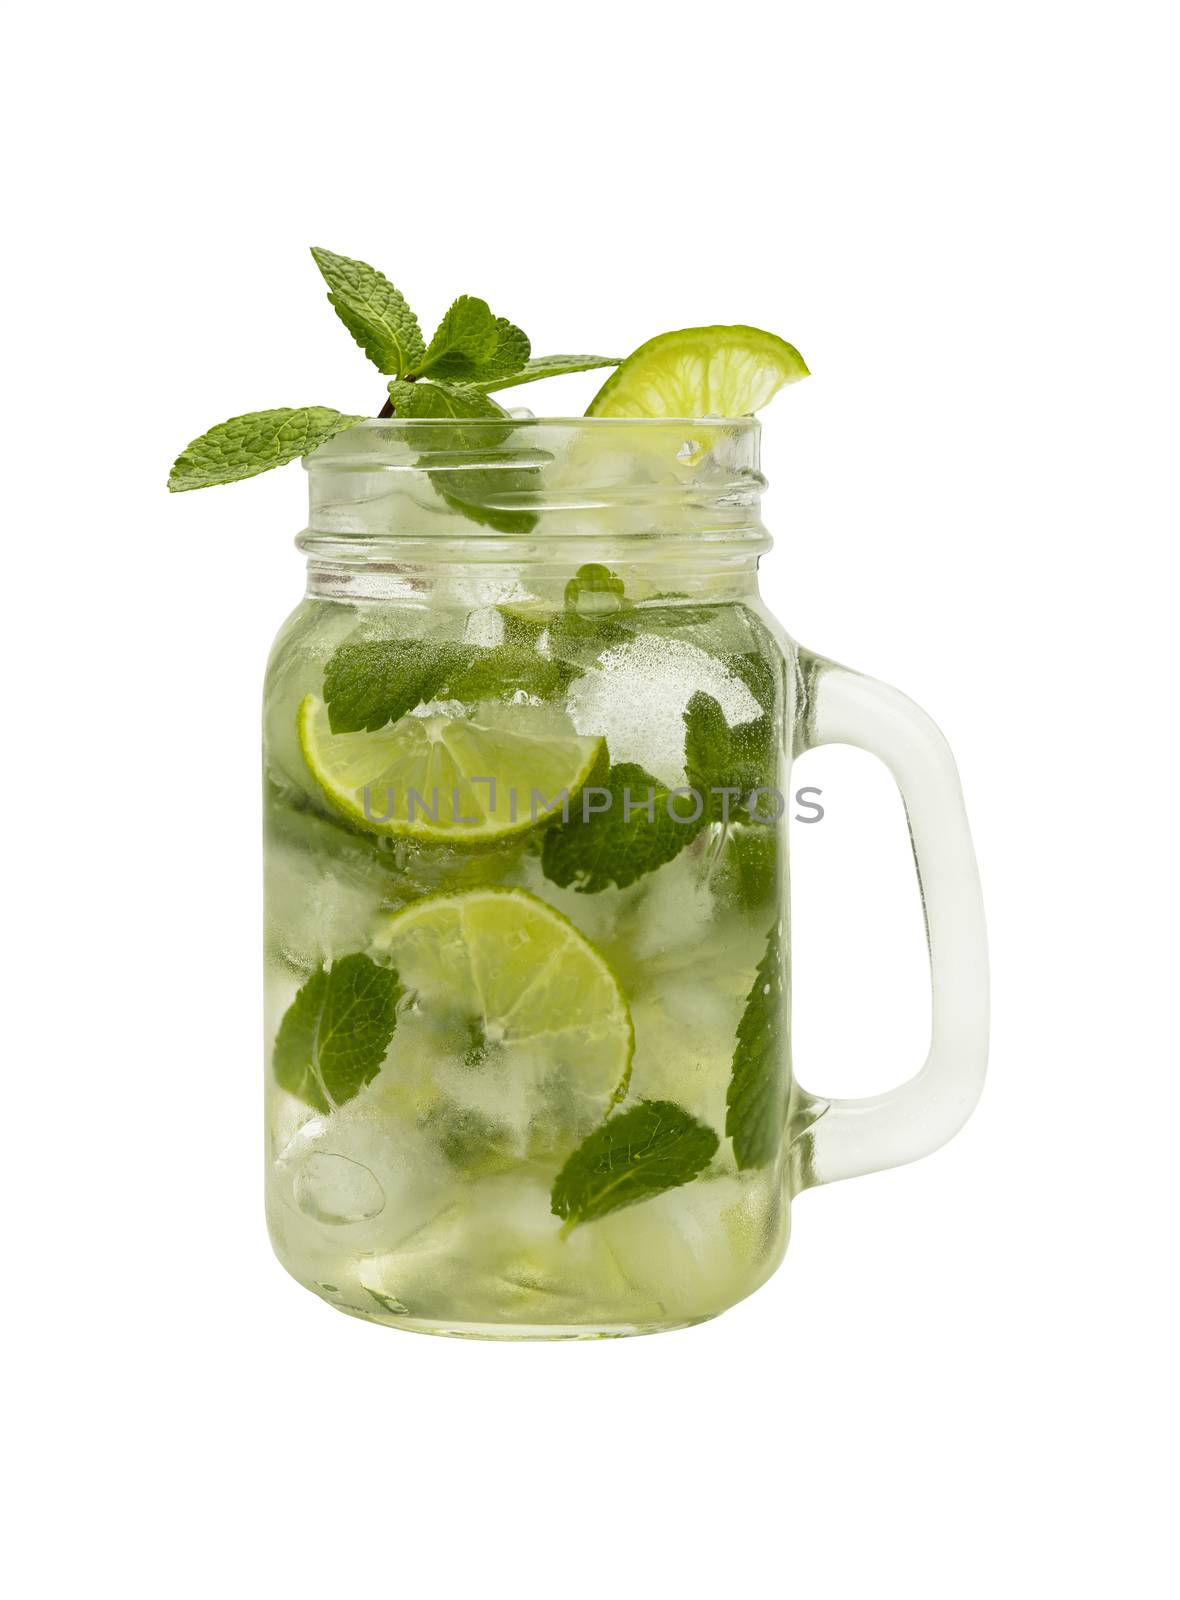 Close up one full big mason jar glass of mojito cocktail with mint leaves, lime slices and ice cubes, isolated on white background, low angle side view